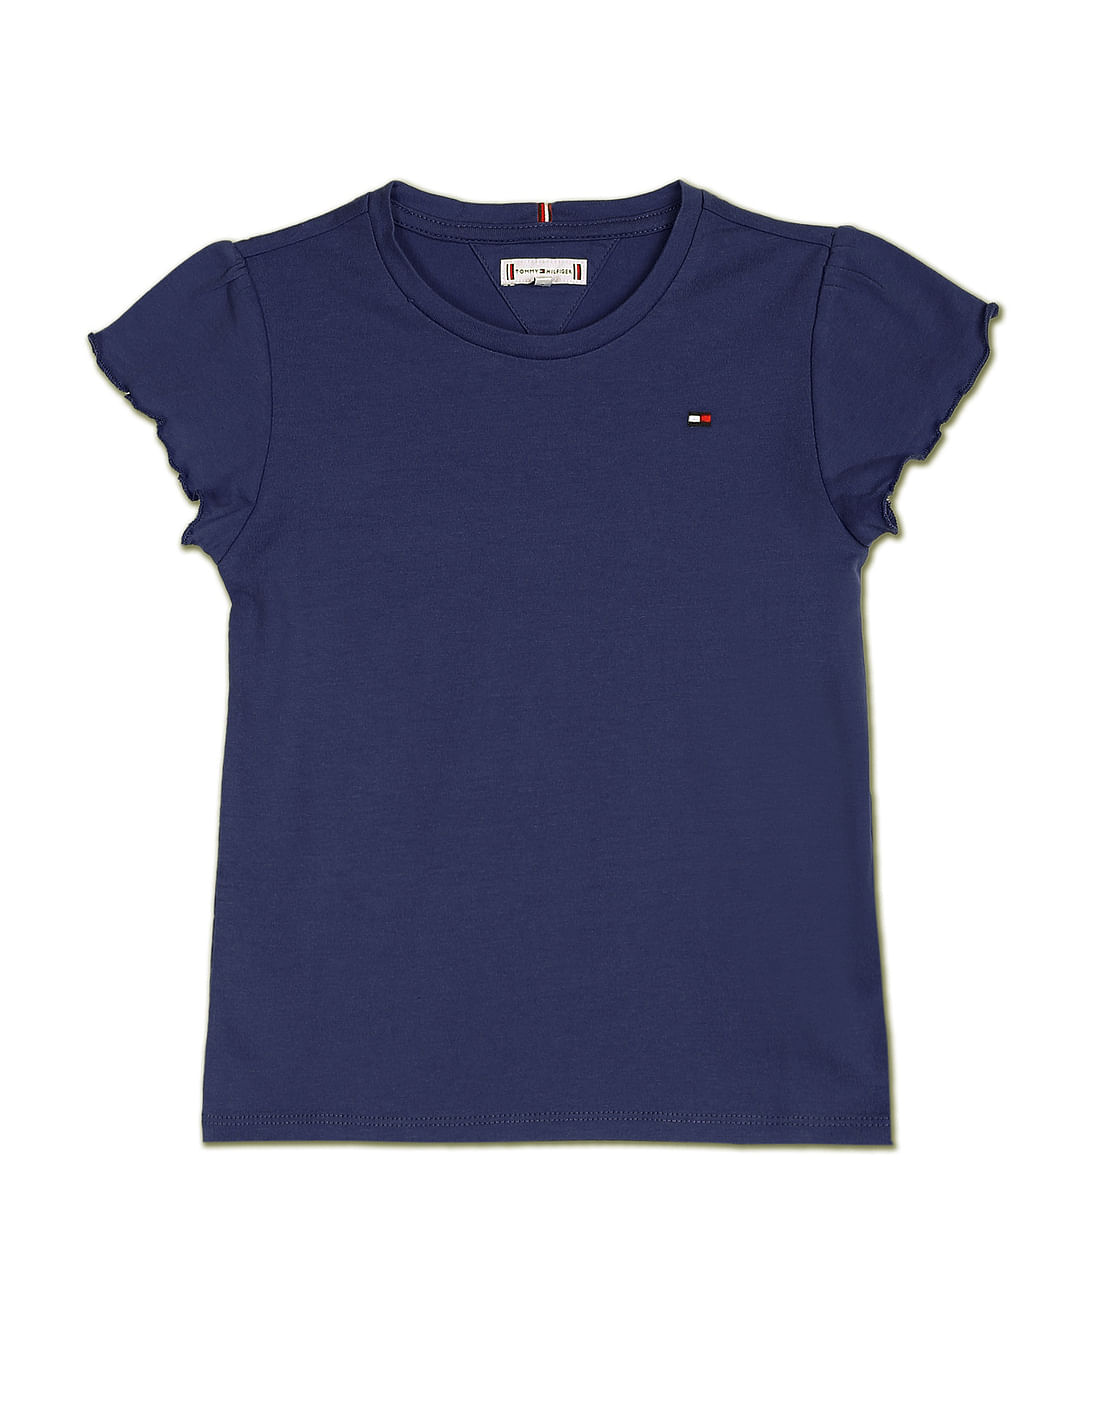 Buy Tommy Hilfiger Kids Essential Ruffle Sleeve Cotton T-Shirt